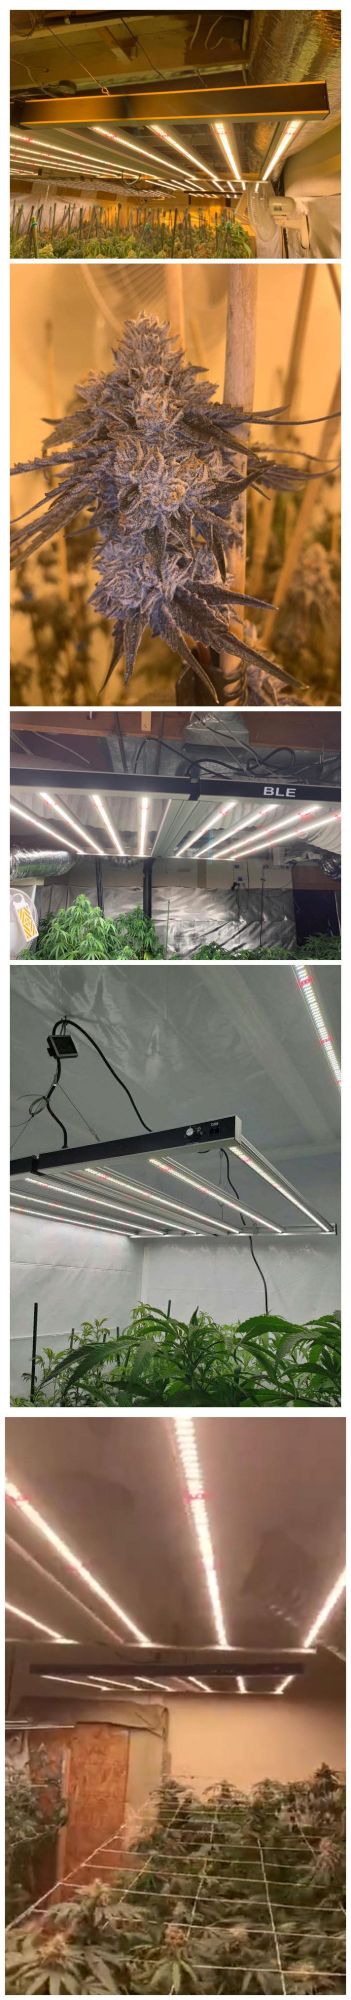 Full Spectrum Dimmable LED Growth Lights 880W for Indoor Hydroponic LED Grow Light on Plant Growth